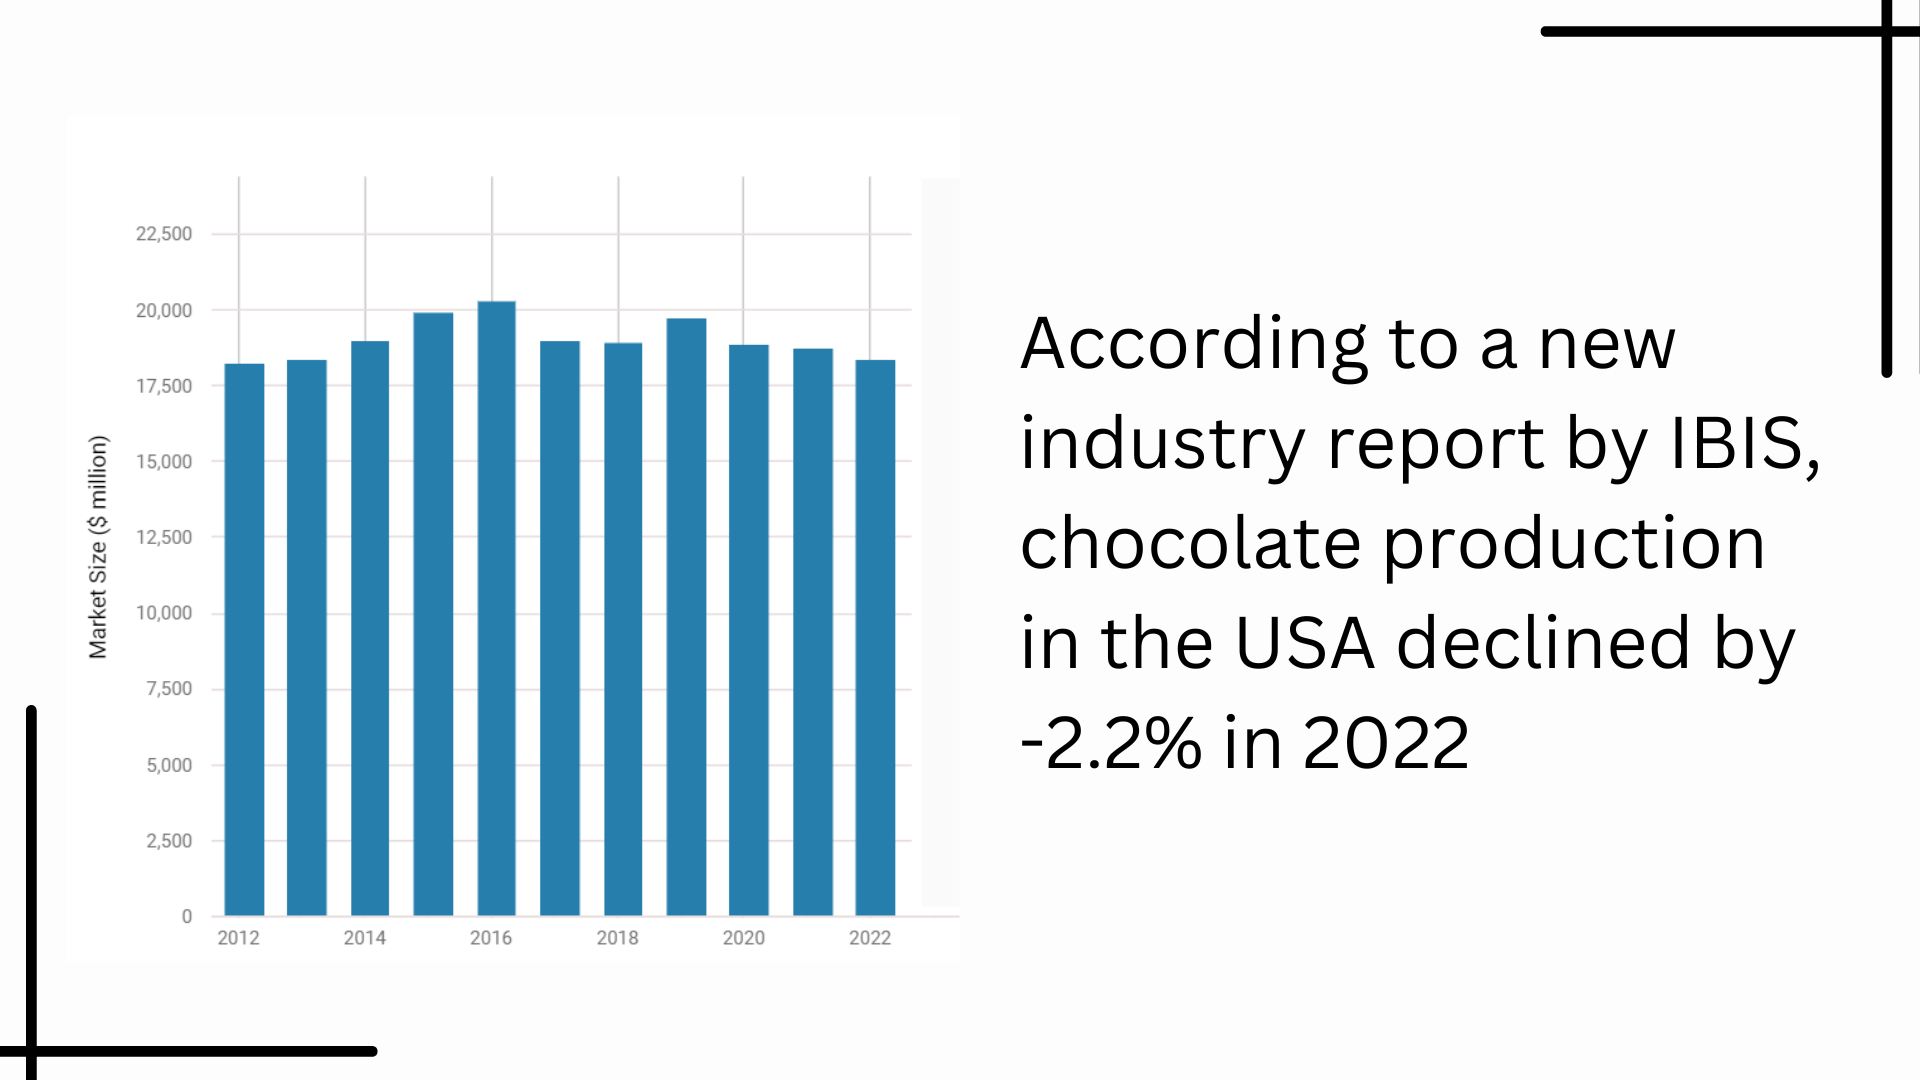 Chocolate production declines in USA by -2.2% in 2022